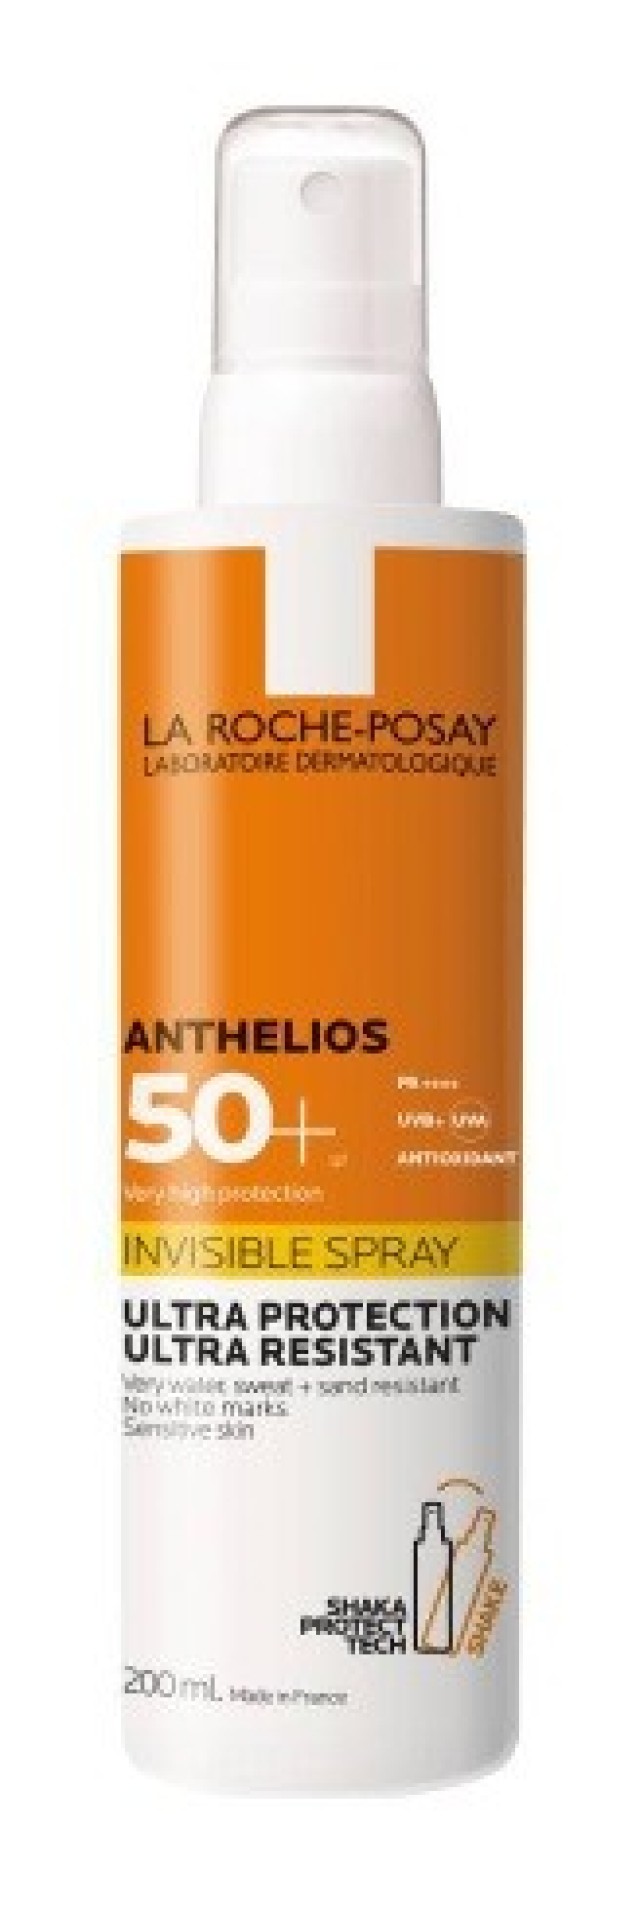 La Roche Posay Anthelios Insivible Spray High Protection with Shaka Protect Care SPF50 Αντιηλιακό Spray Σώματος 200ml